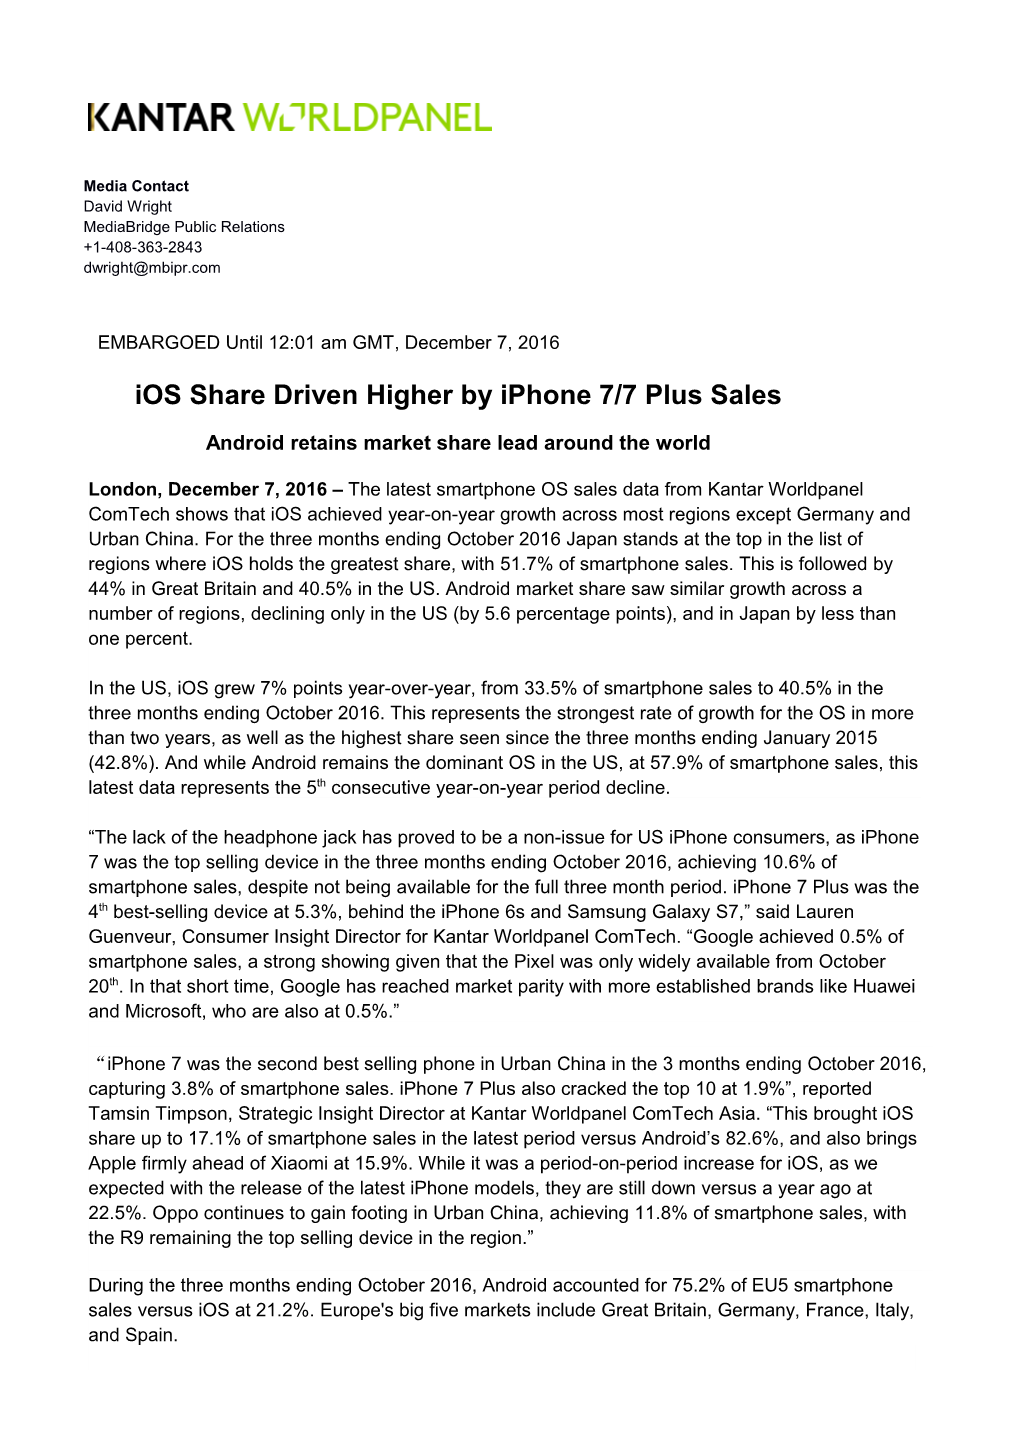 Ios Share Driven Higher by Iphone 7/7 Plus Sales